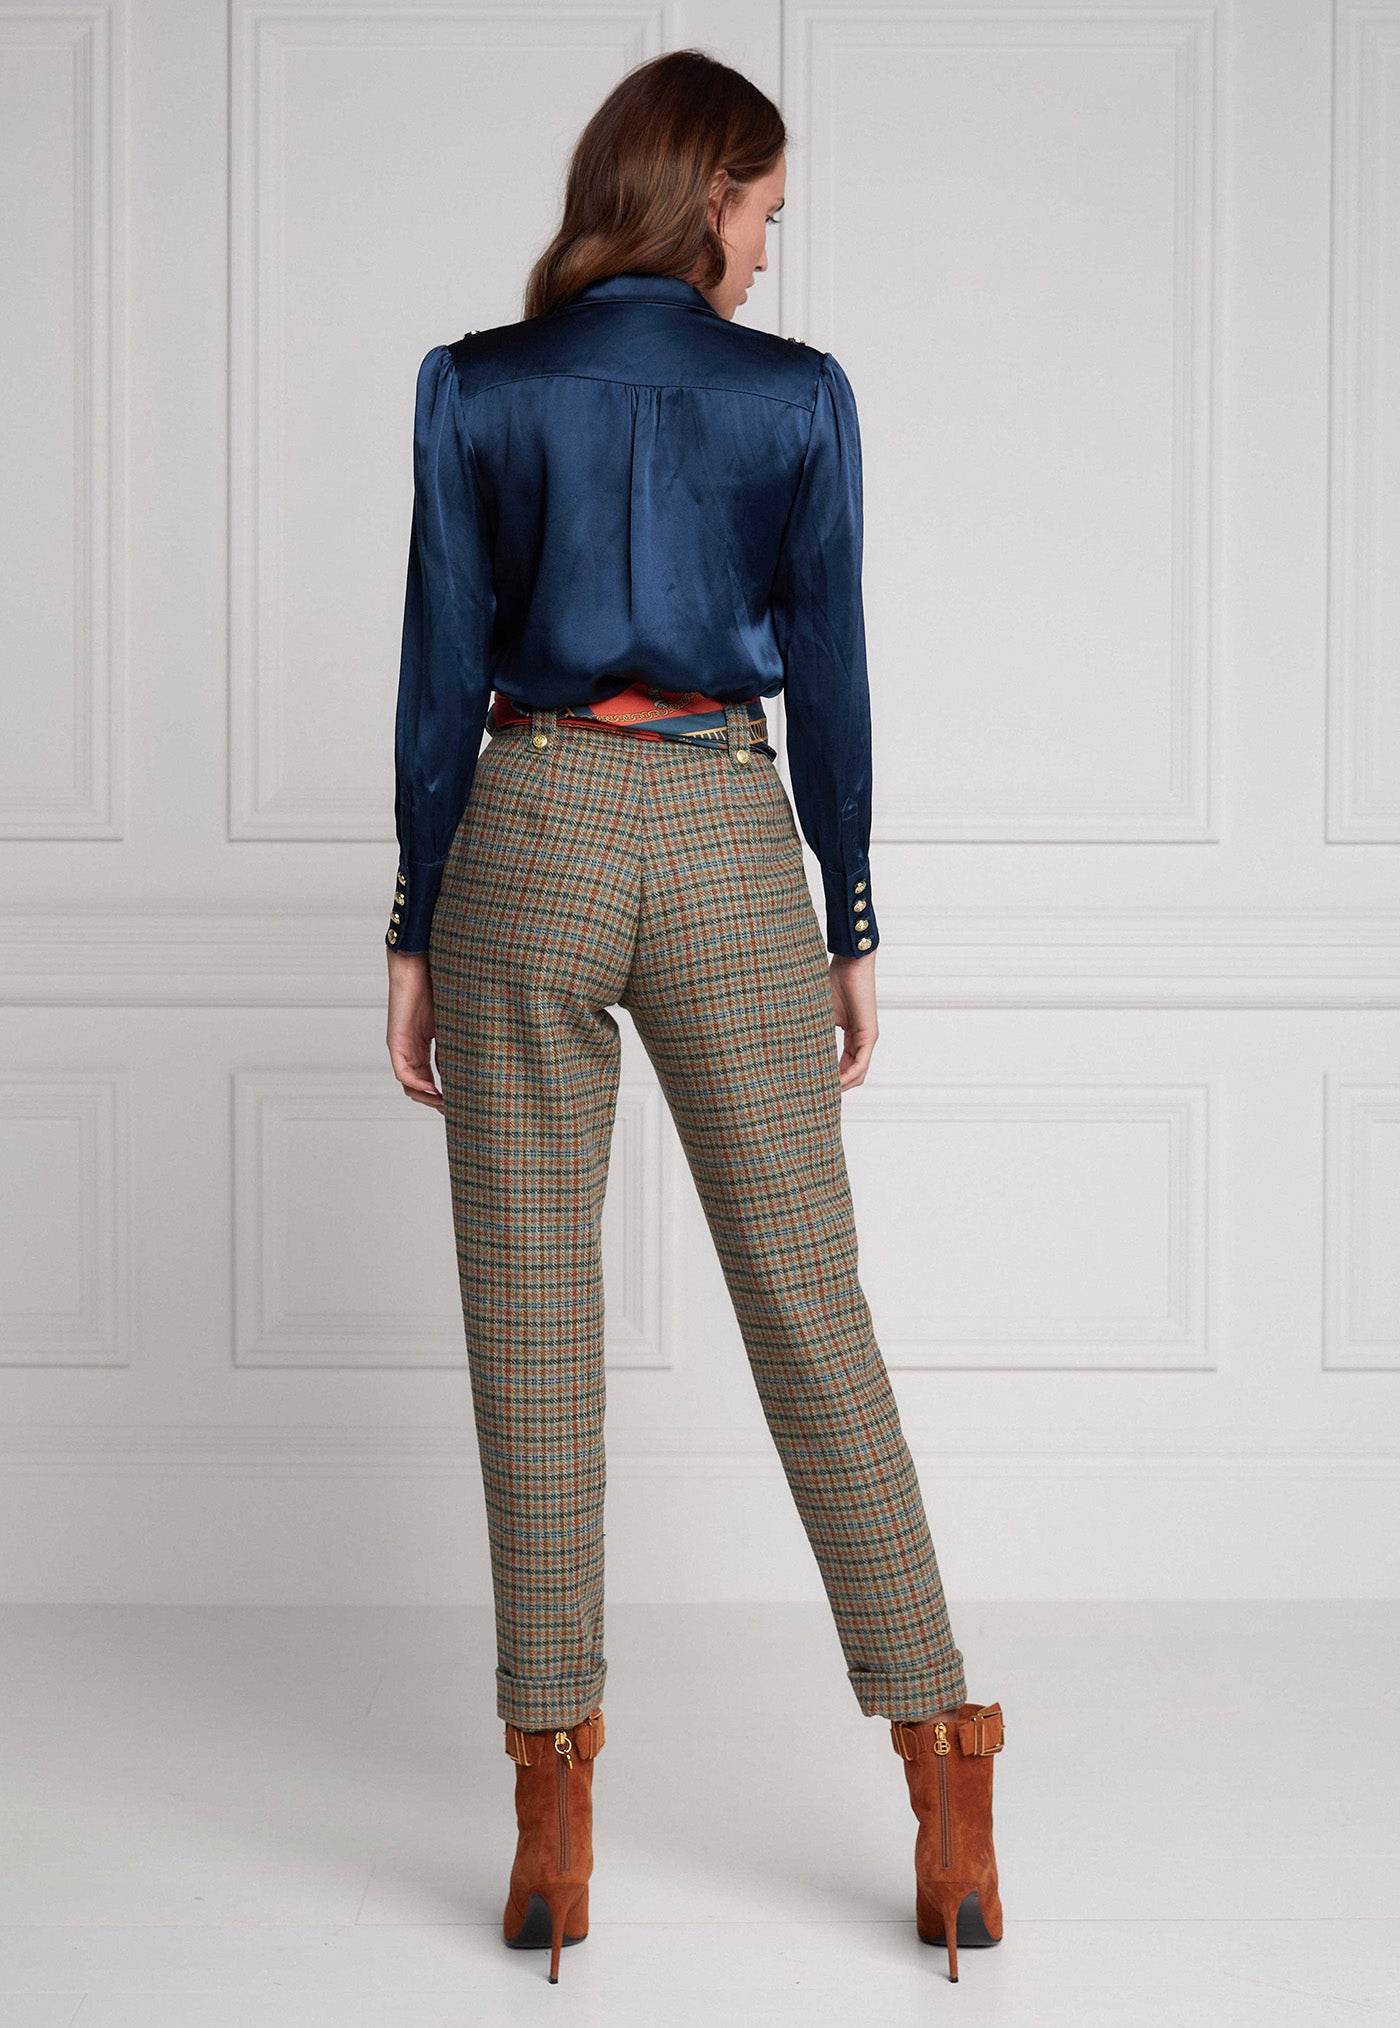 High Waisted Peg Trouser - Bredon Tweed sold by Angel Divine